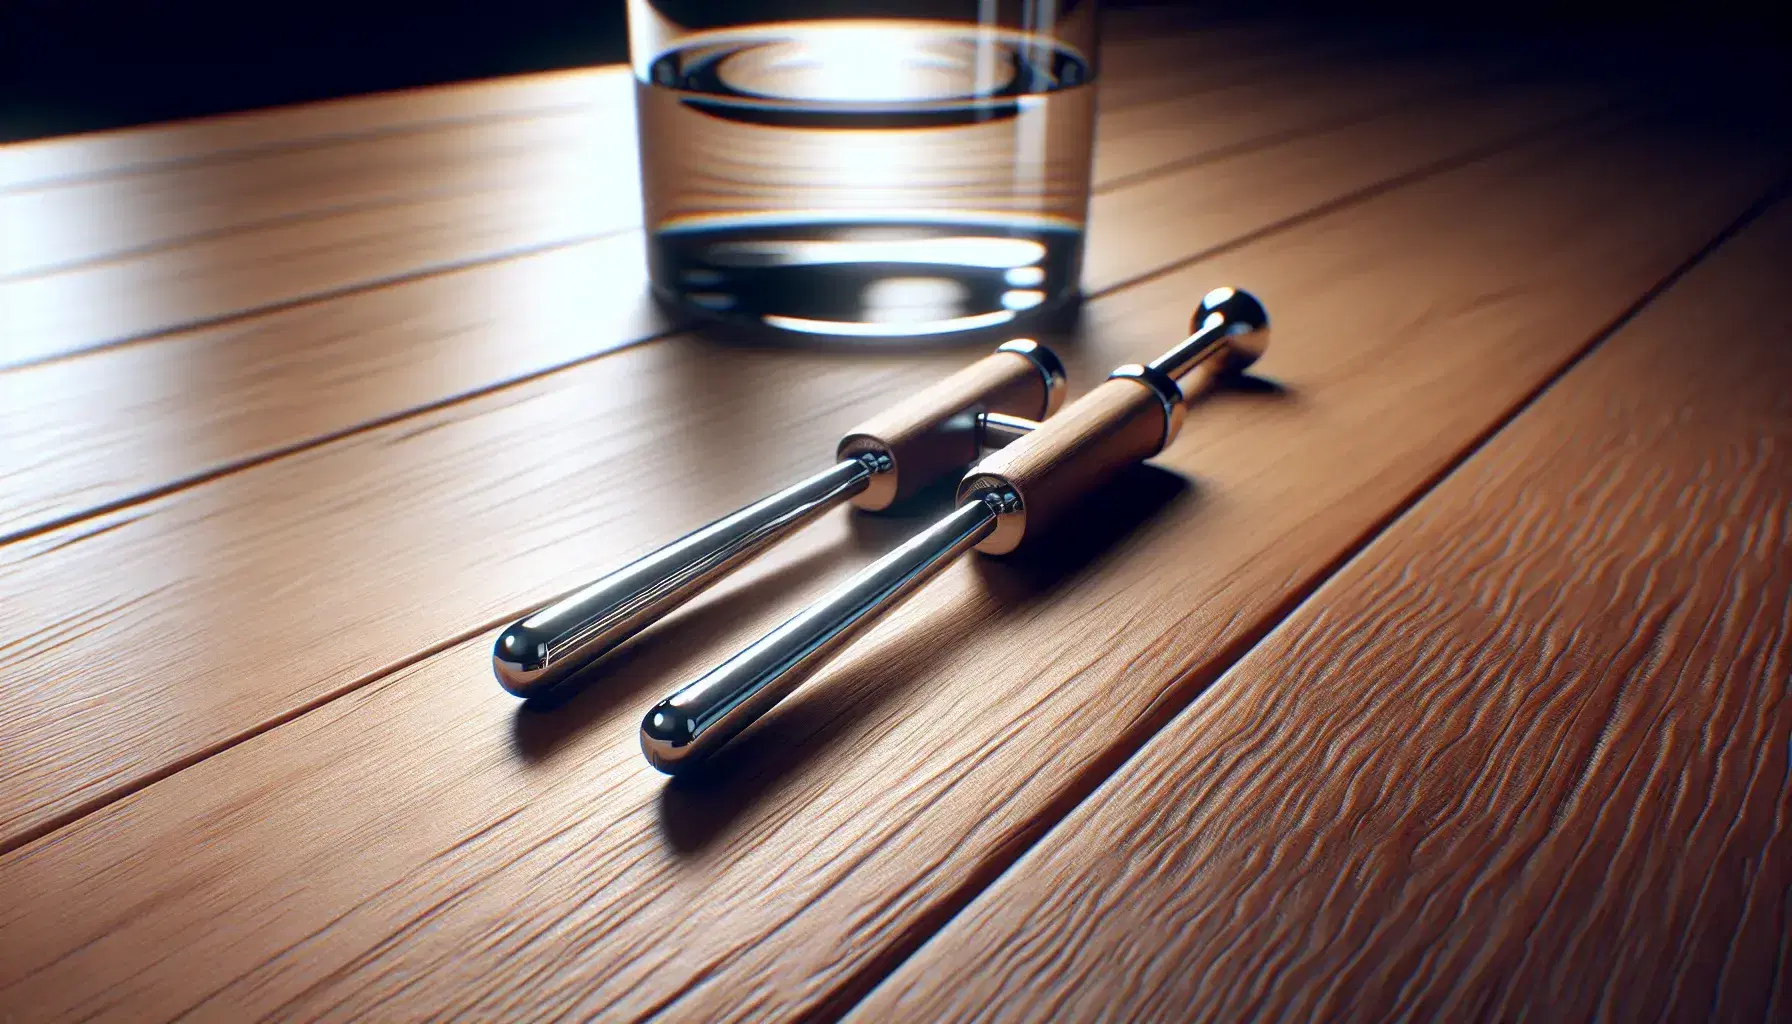 Close-up of a shiny metallic tuning fork on a wooden table with a half-filled beaker of clear water in the background, soft lighting enhancing textures.